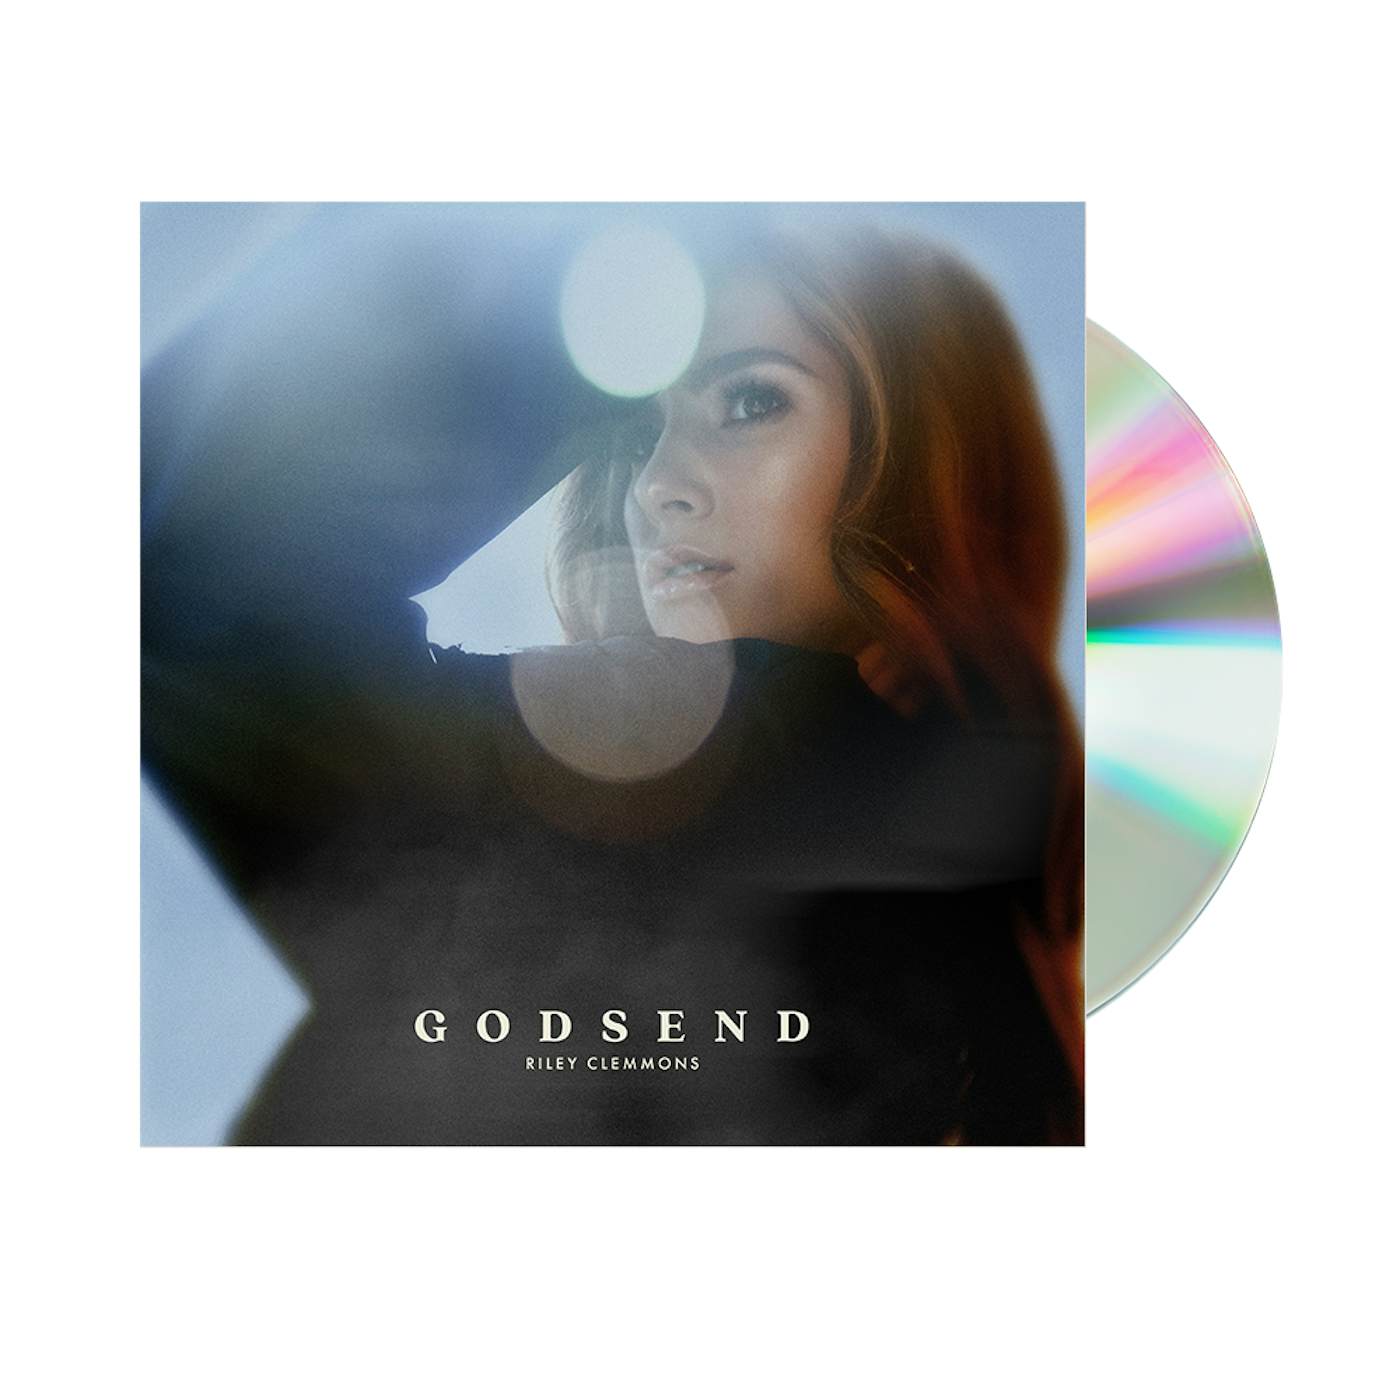 Riley Clemmons “Godsend” Alternate Cover Collectible CD